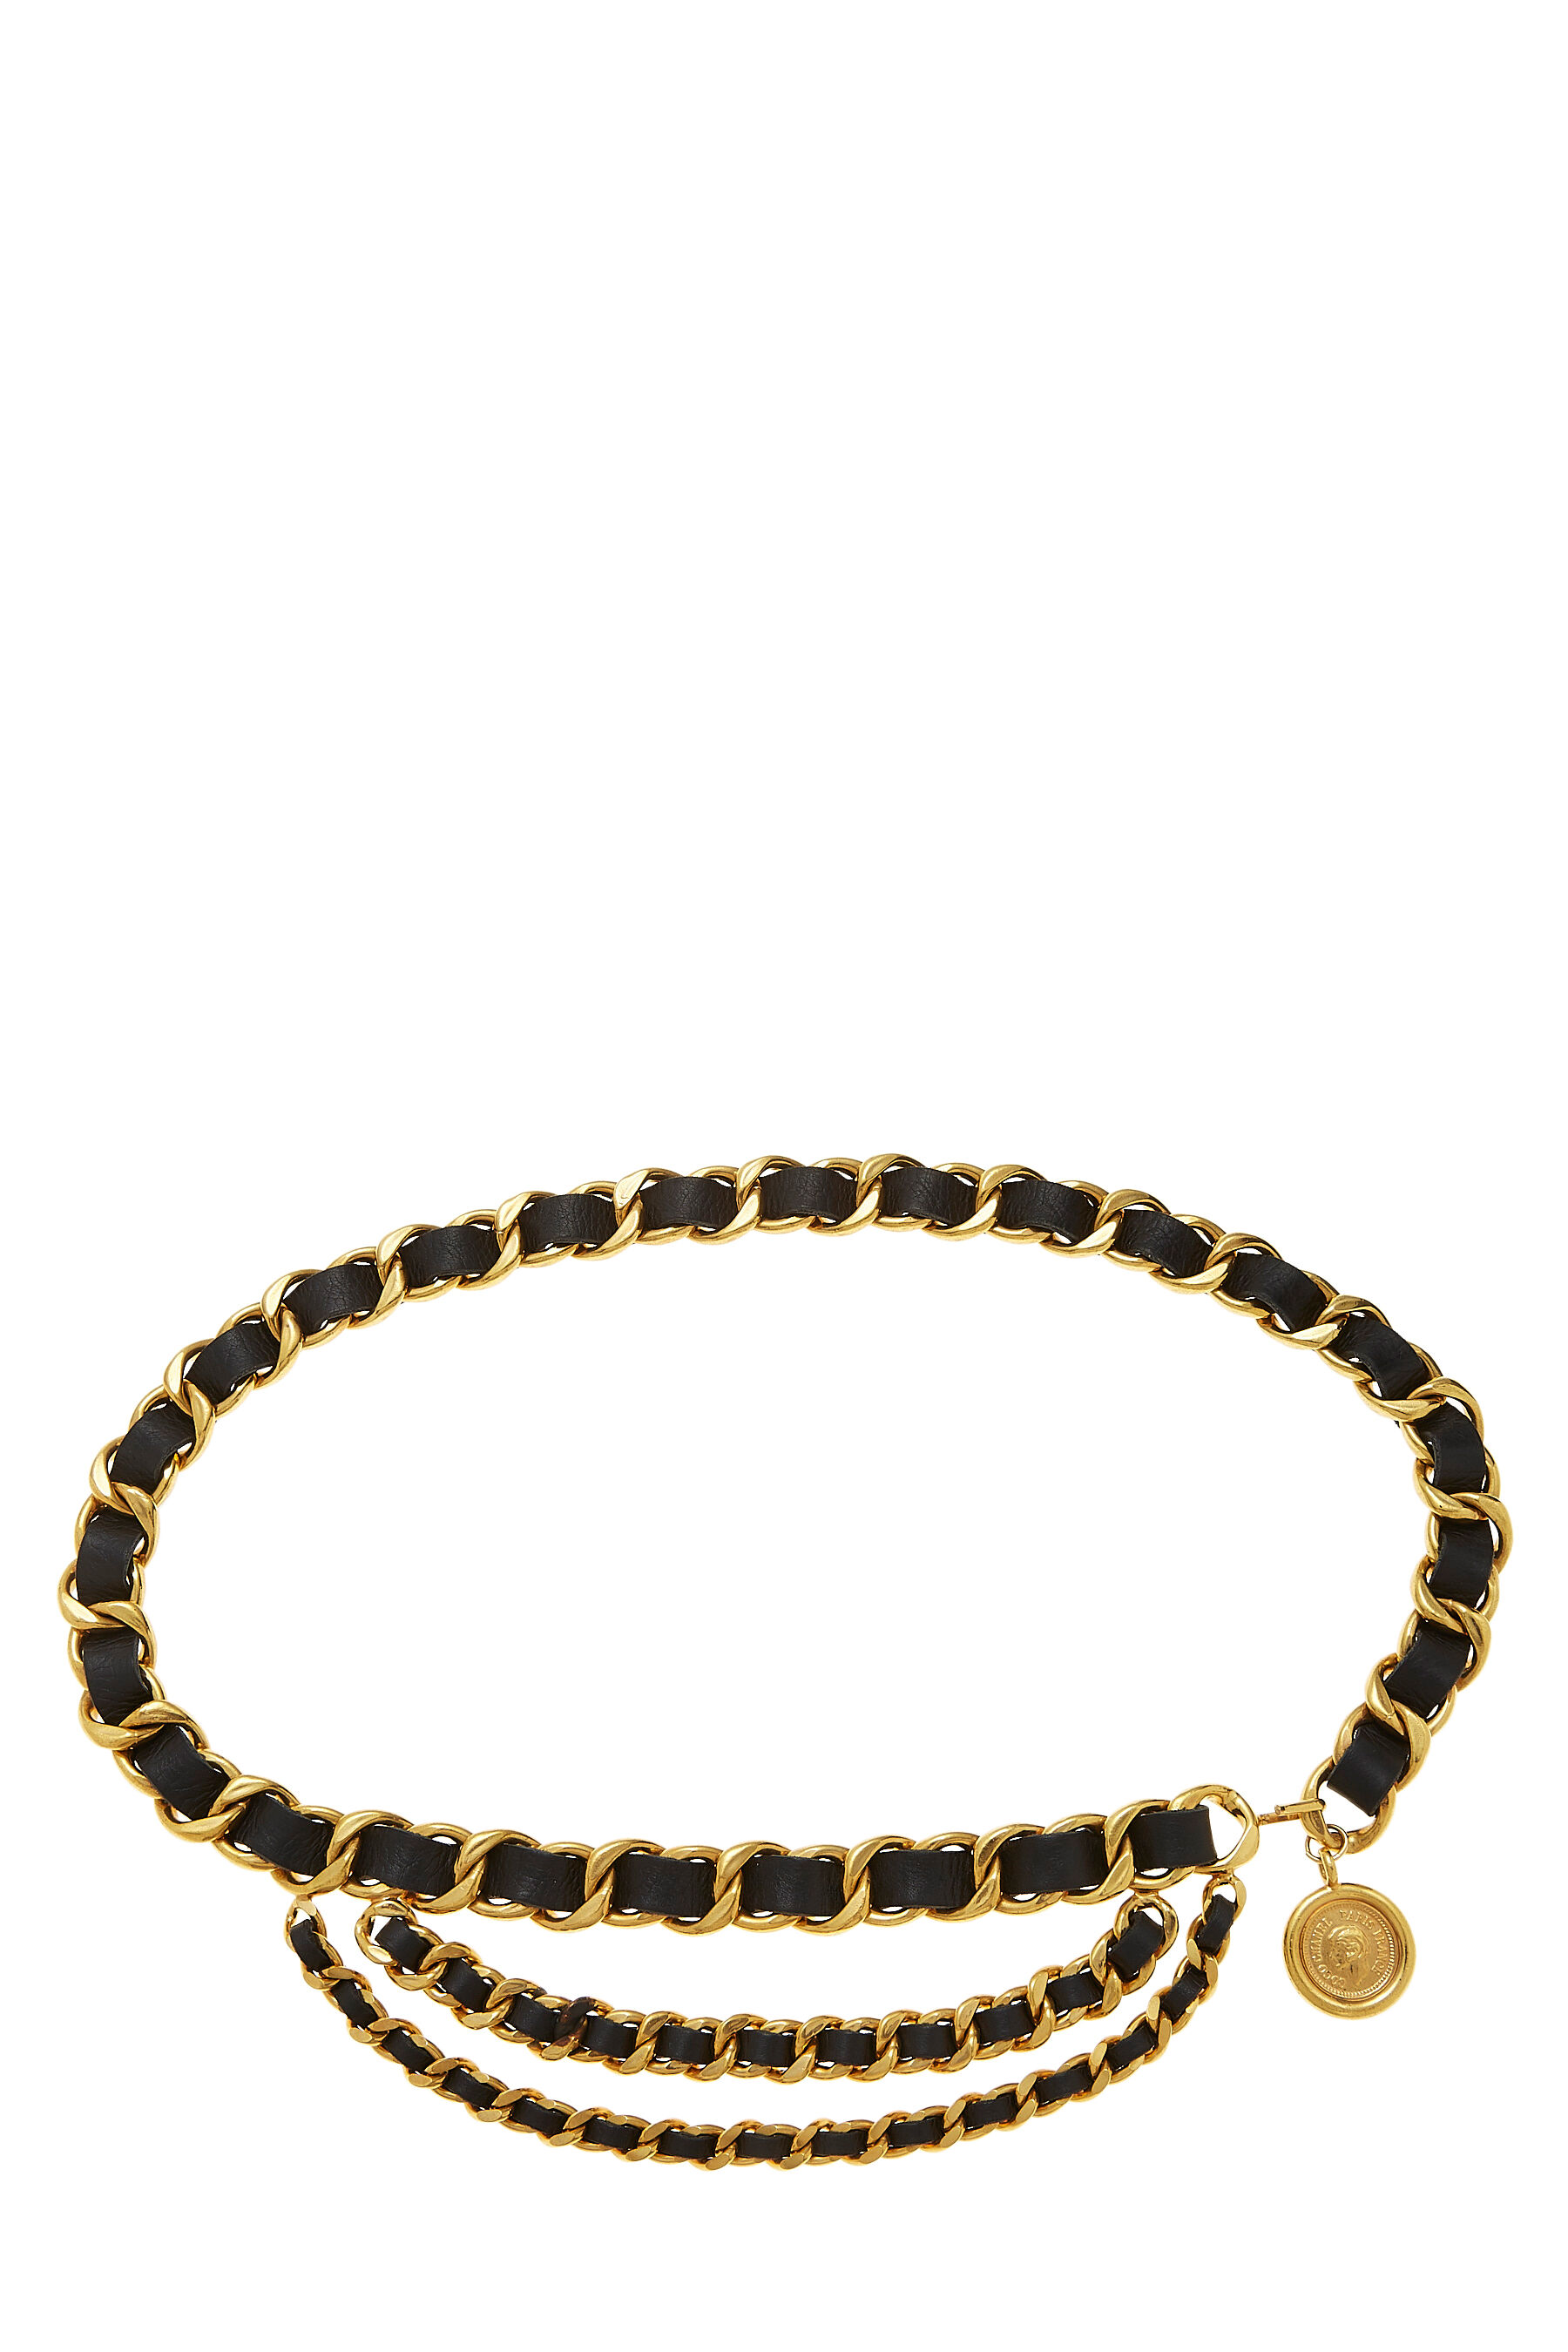 Chanel - Gold & Black Leather Chain Belt 3